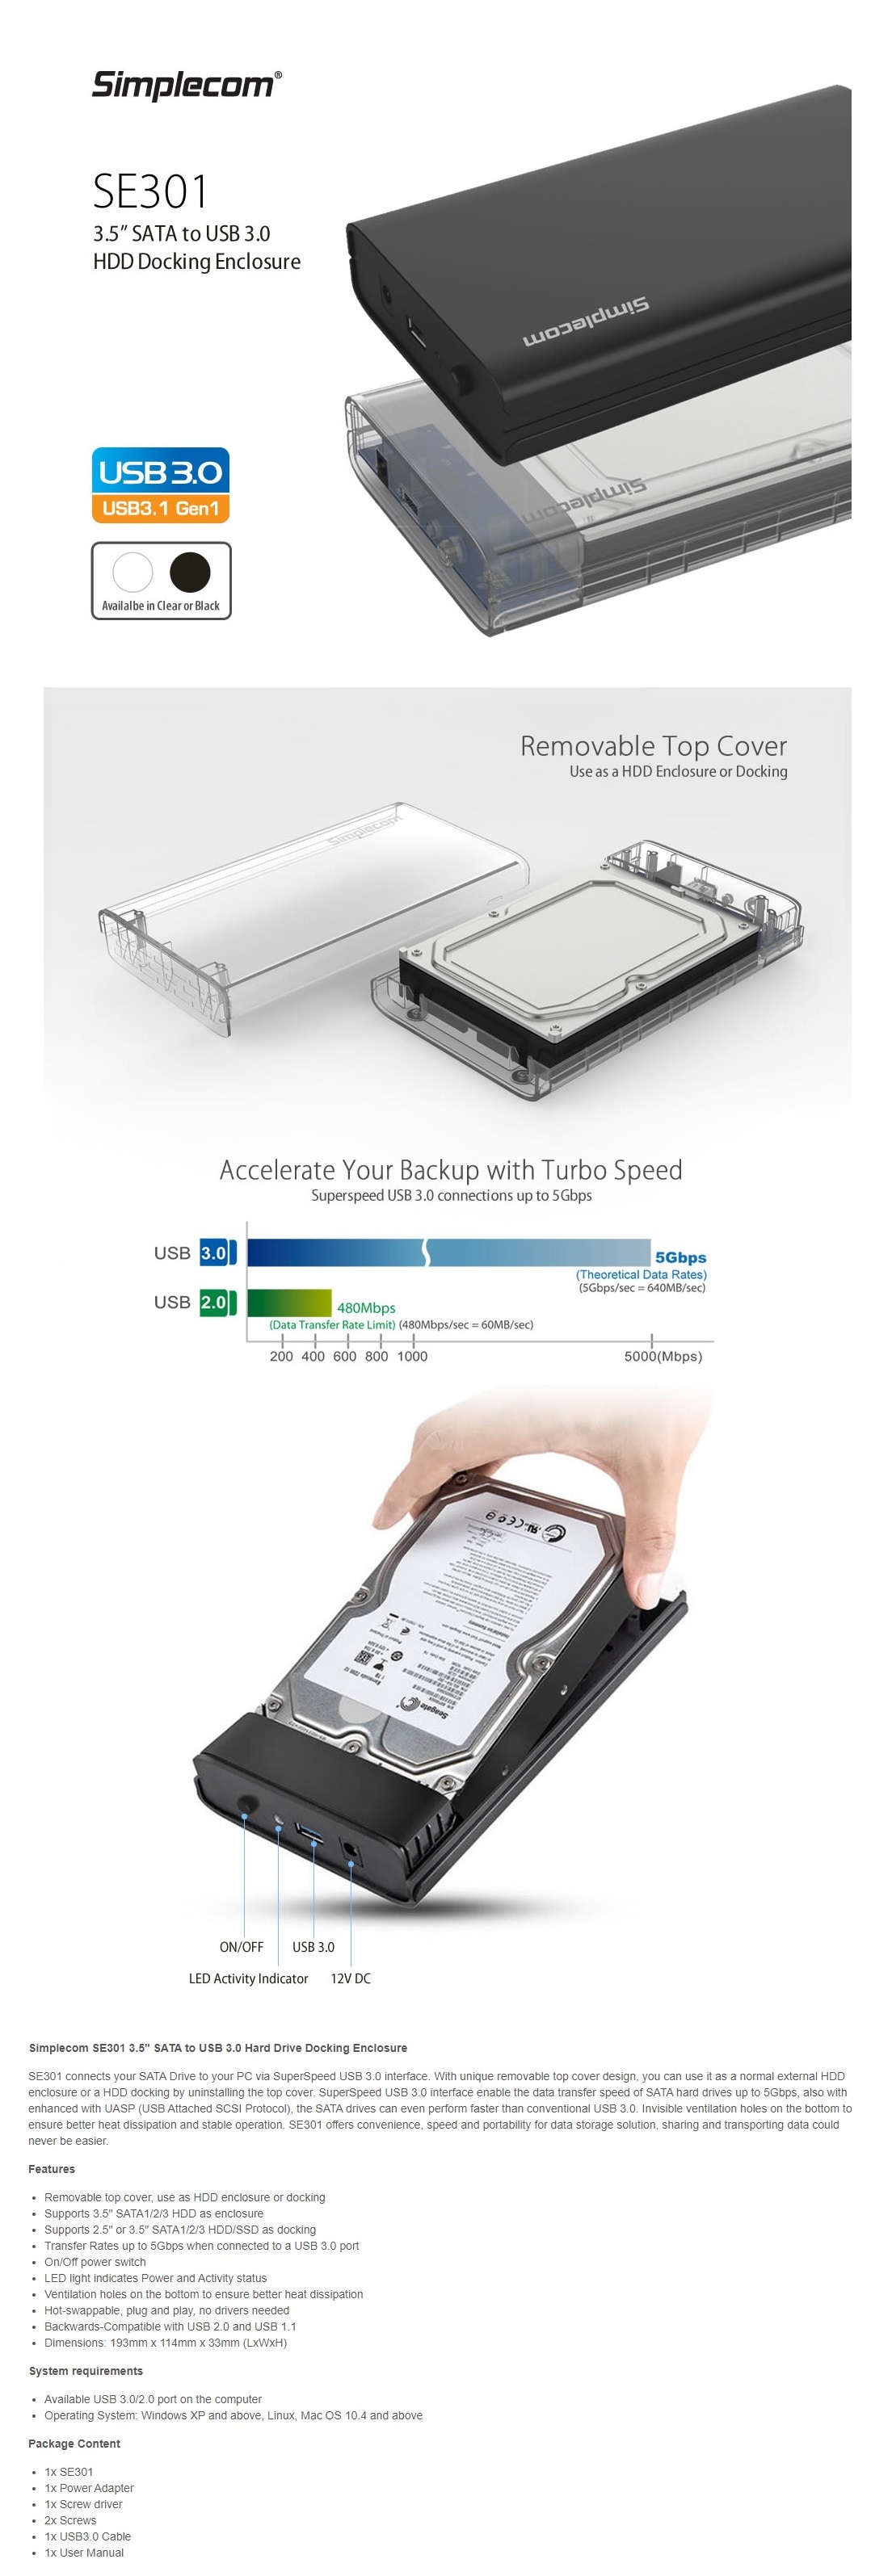 A large marketing image providing additional information about the product Simplecom SE301-CL 3.5" SATA to USB 3.0 Hard Drive Docking Enclosure - Clear - Additional alt info not provided